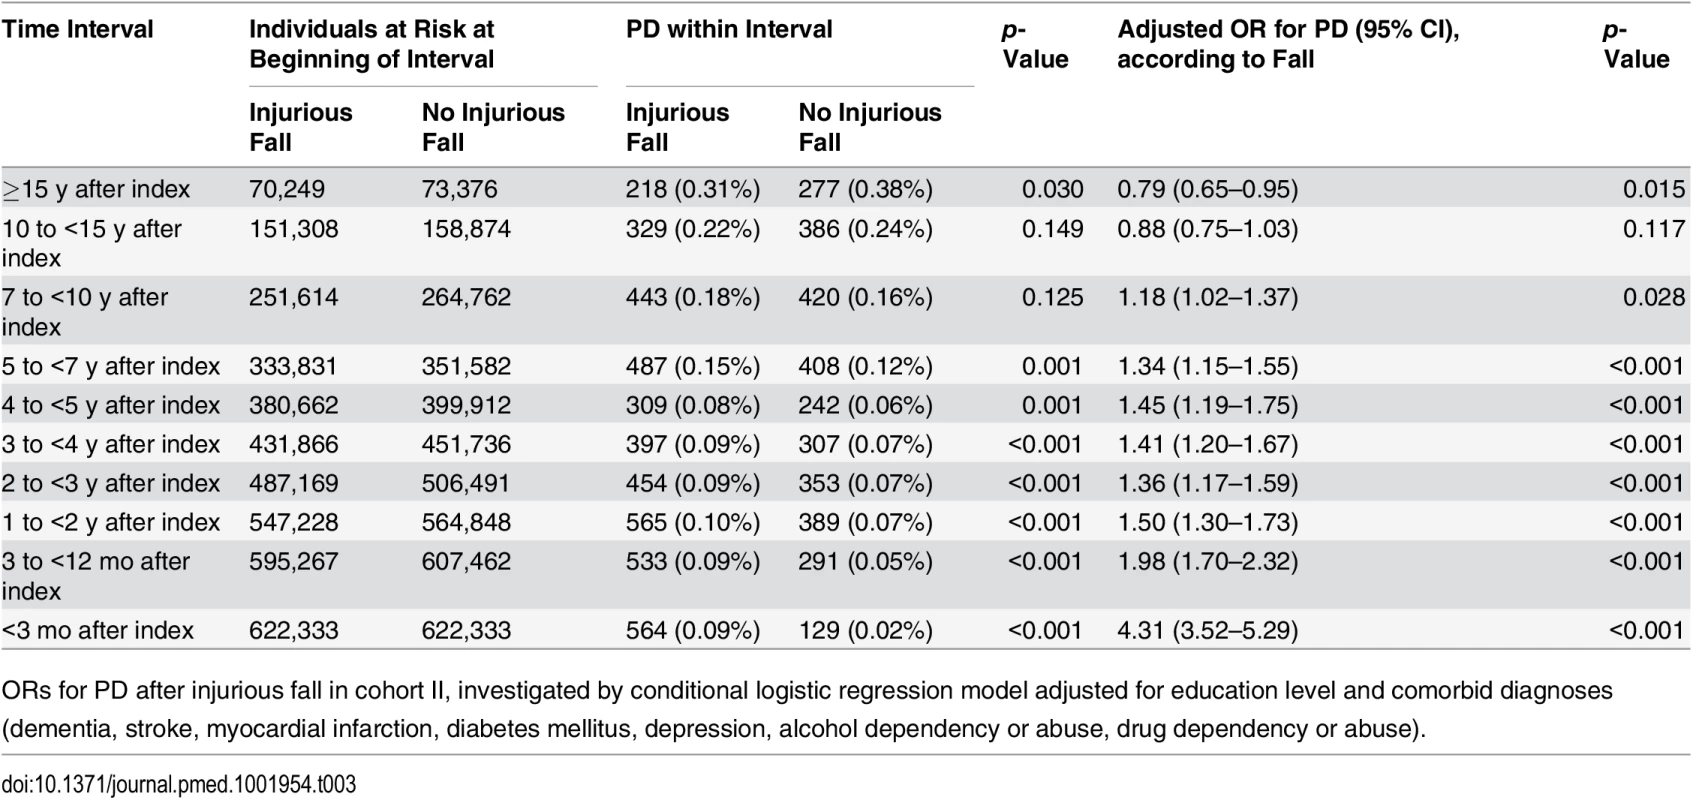 Incidence of Parkinson disease according to fall in cohort II.